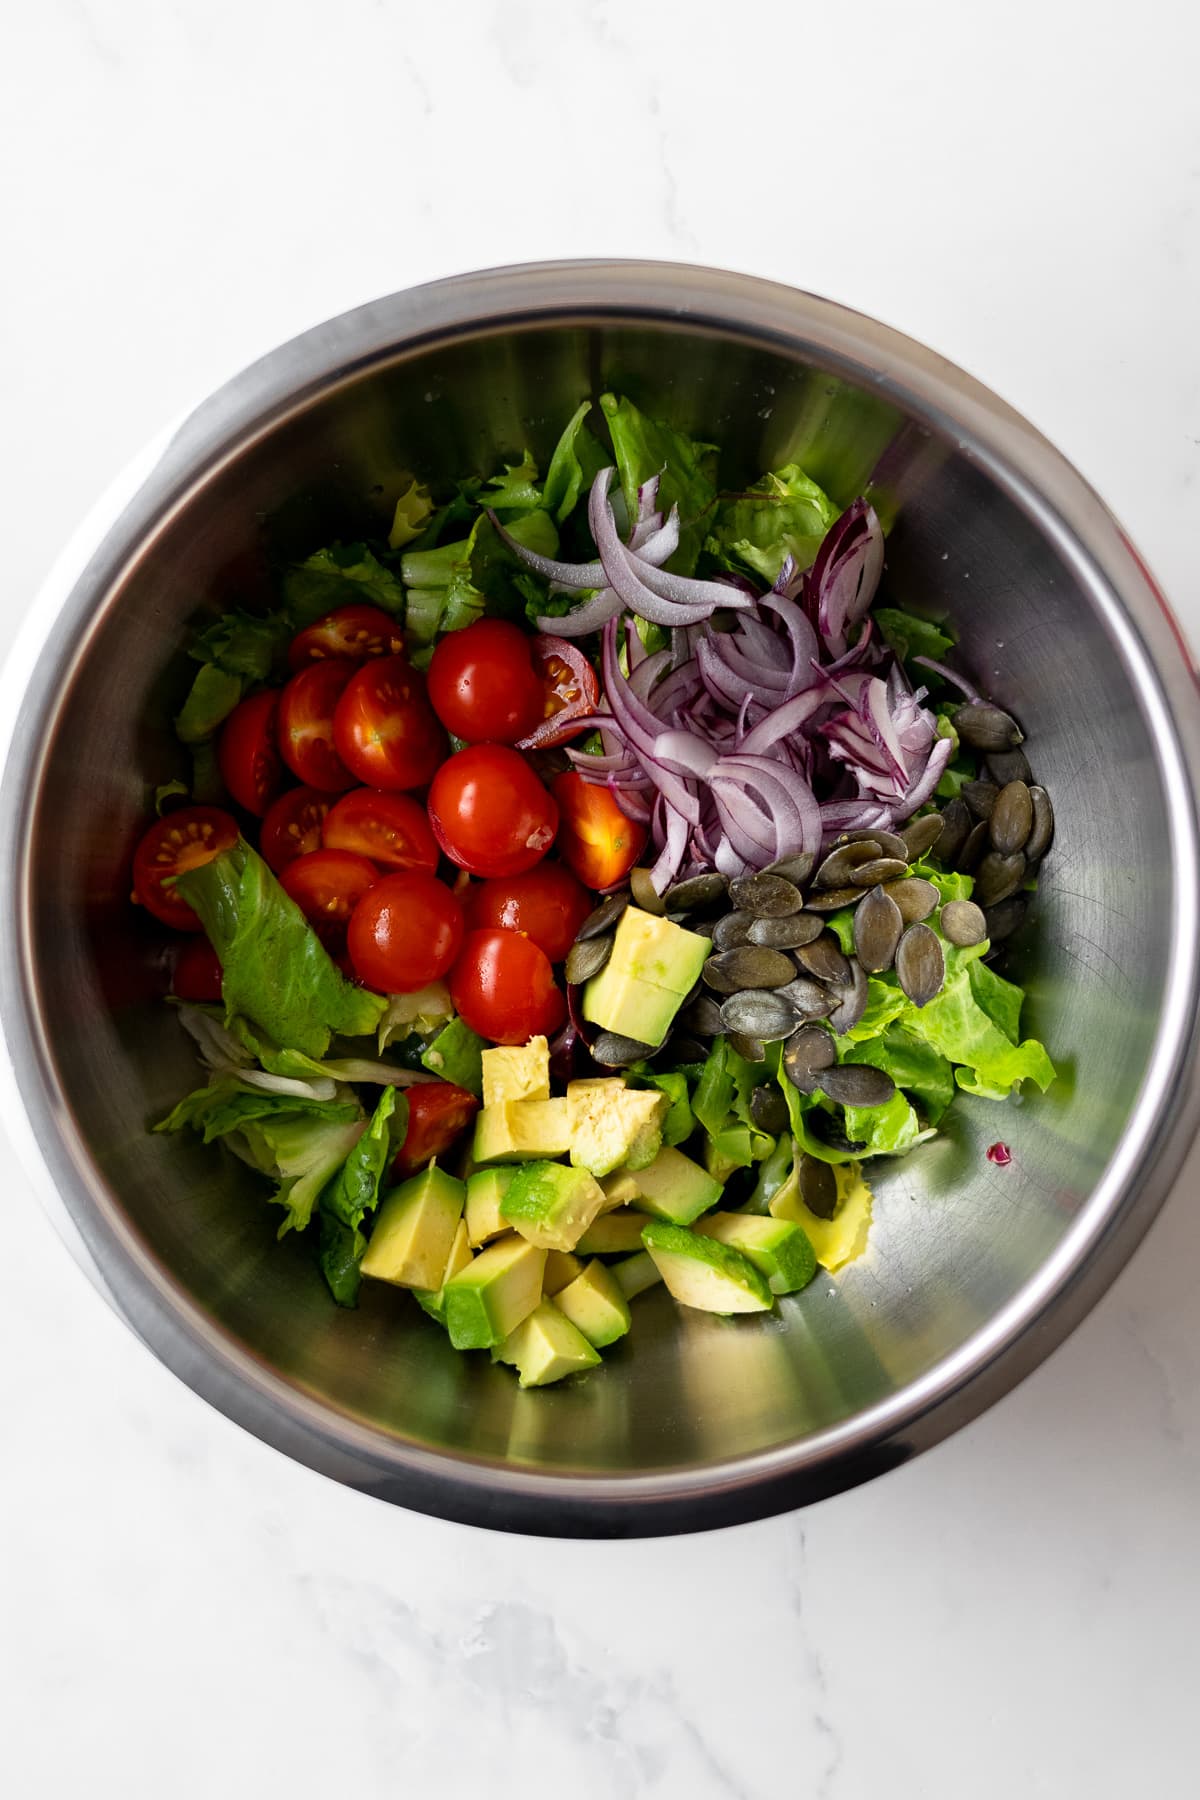 salad ingredients in a mixing bowl